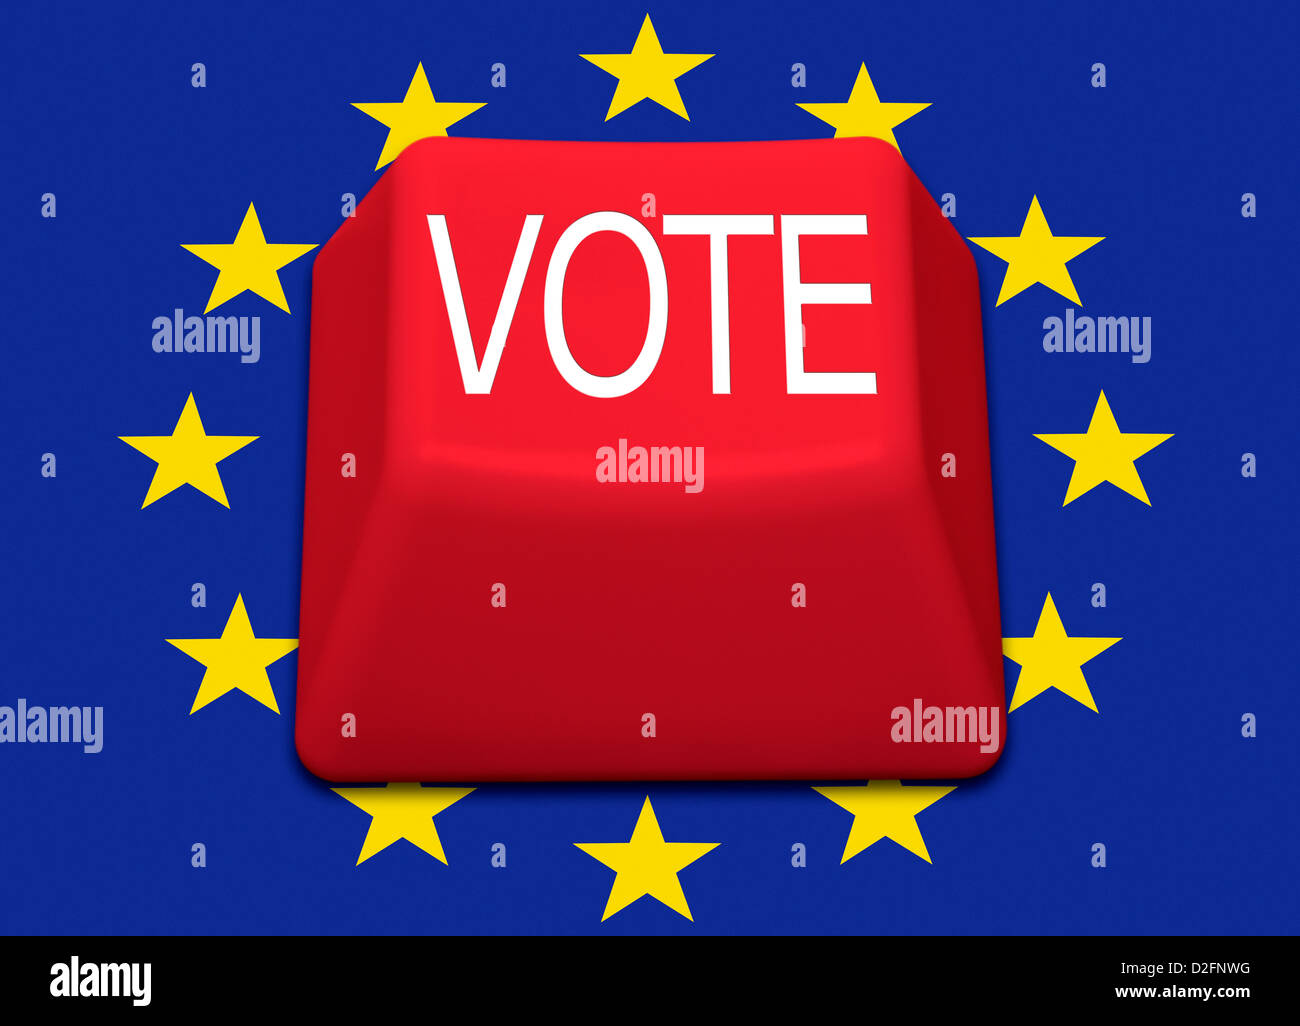 Isolated red computer key with the word VOTE on a European Union flag background - UK referendum on Europe vote Stock Photo